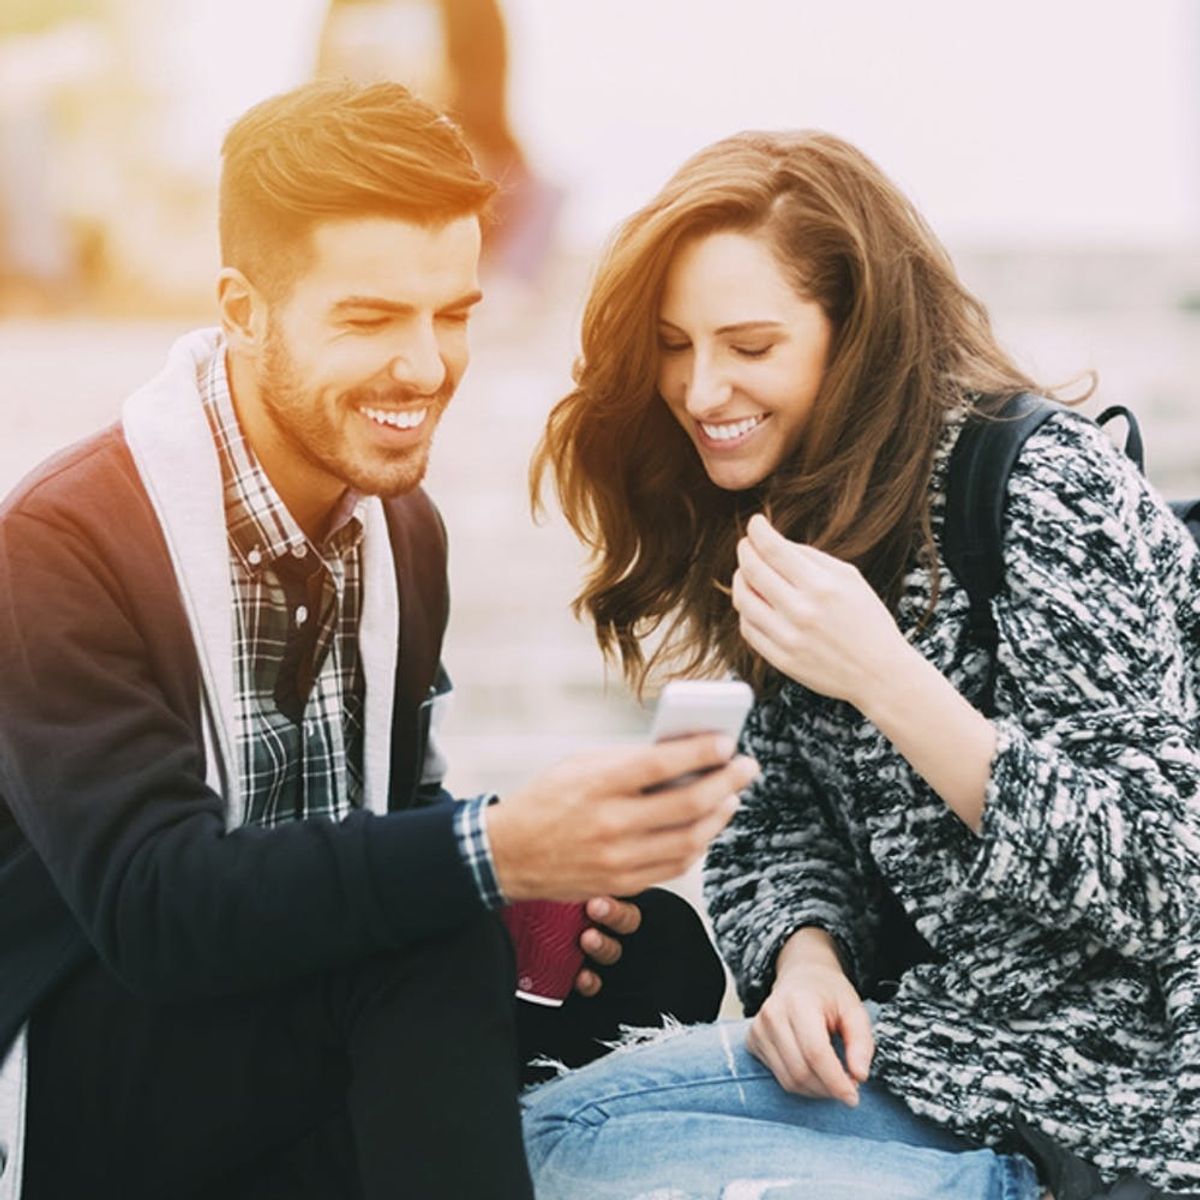 You’re Most Likely to Use Online Dating Apps At This Age